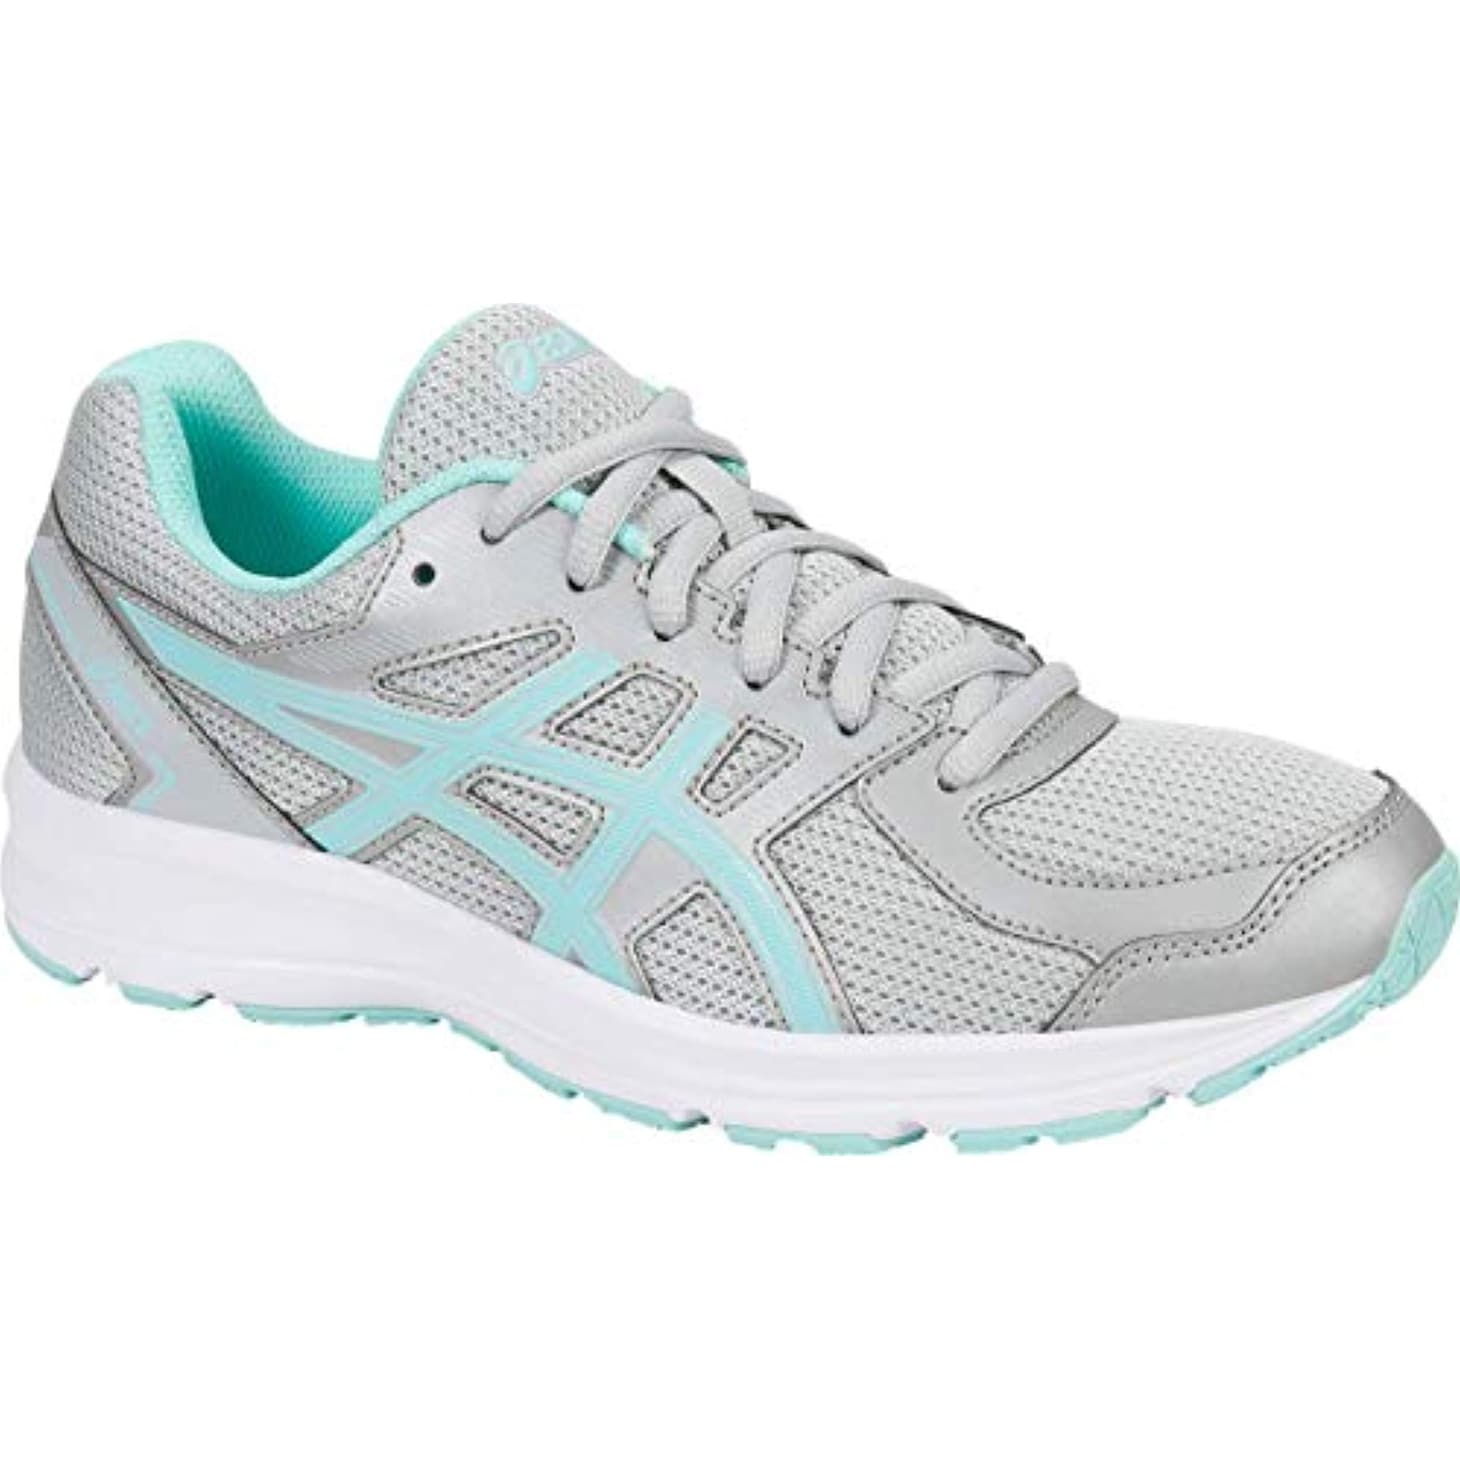 m and m direct asics women's